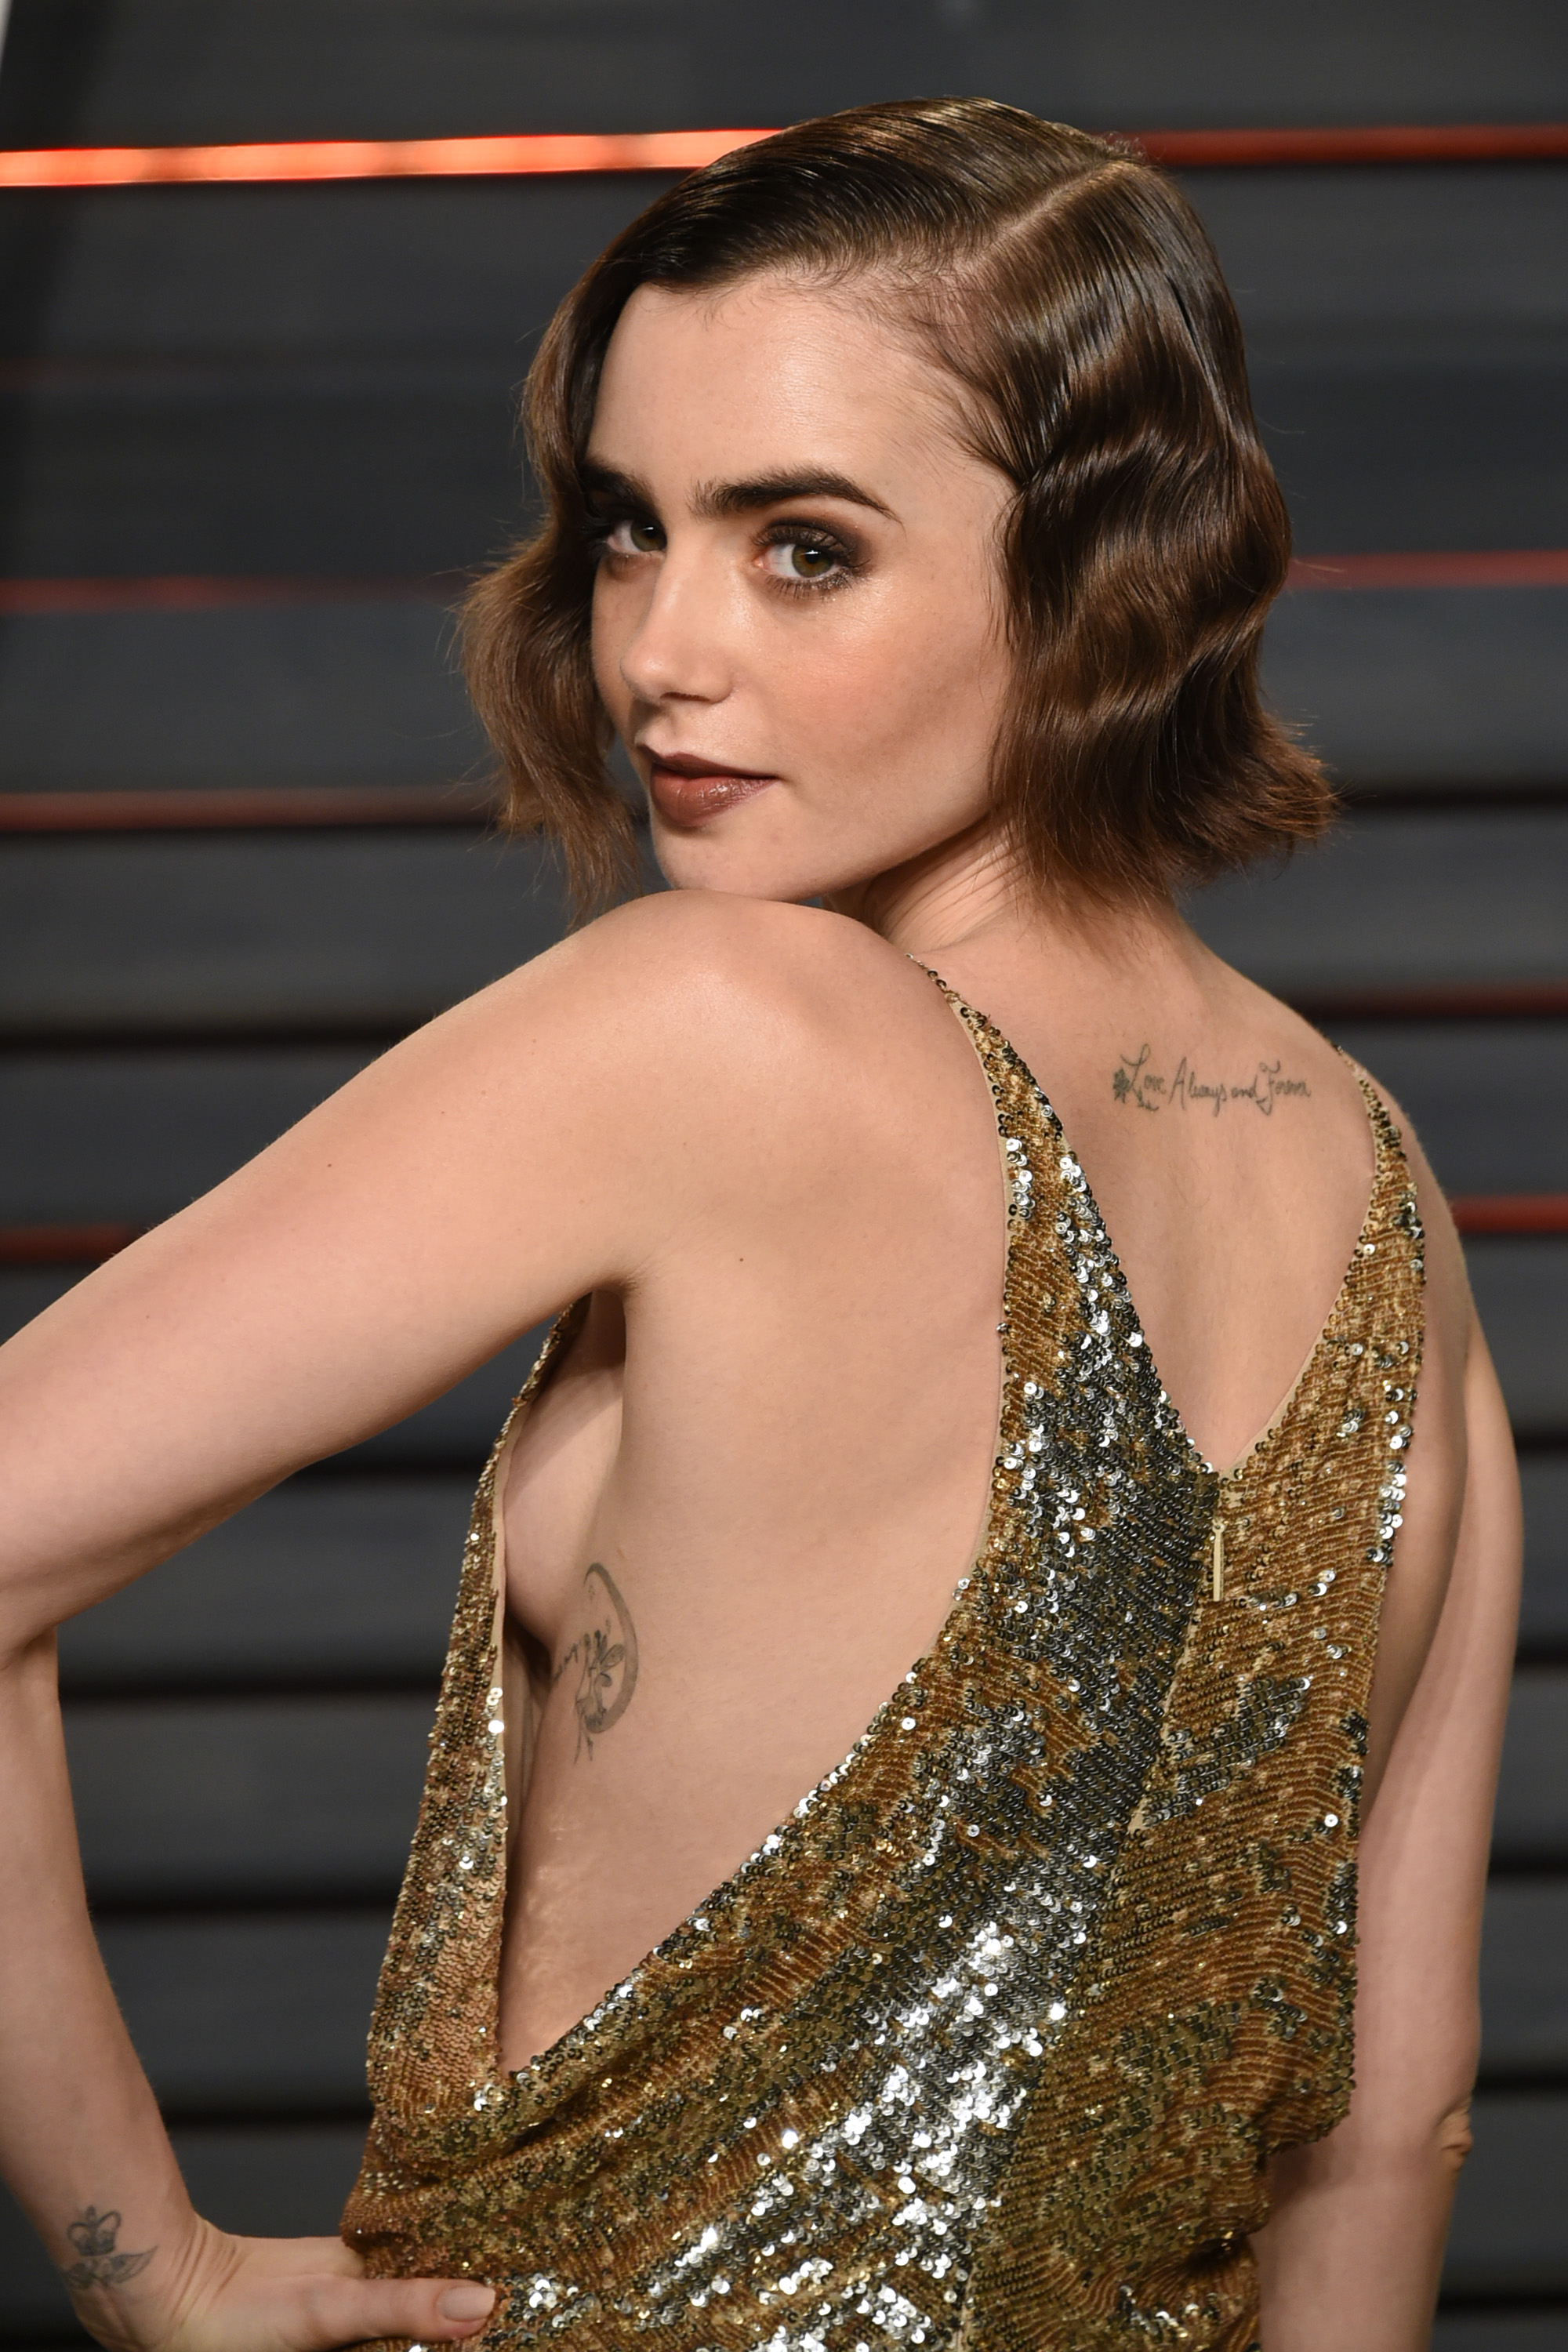 View the topic Lily Collins.